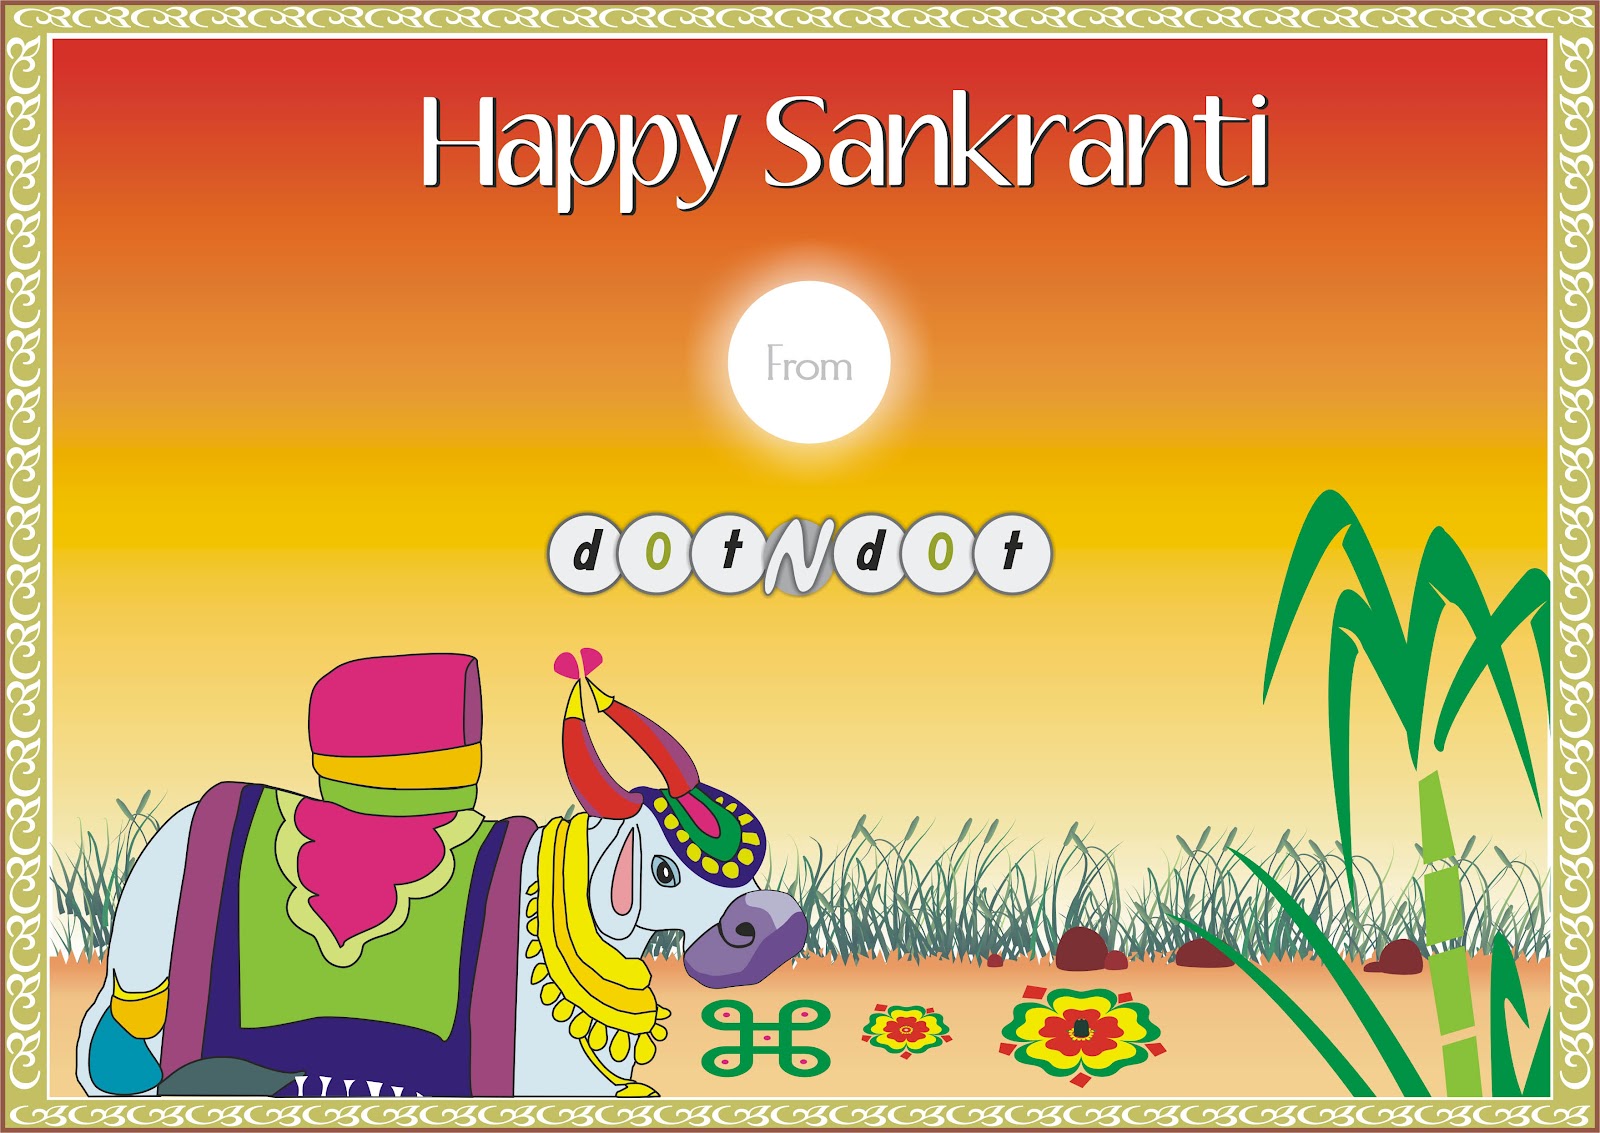 All In One Wallpapers Happy Makar Sankranti Wishes Greeting Card